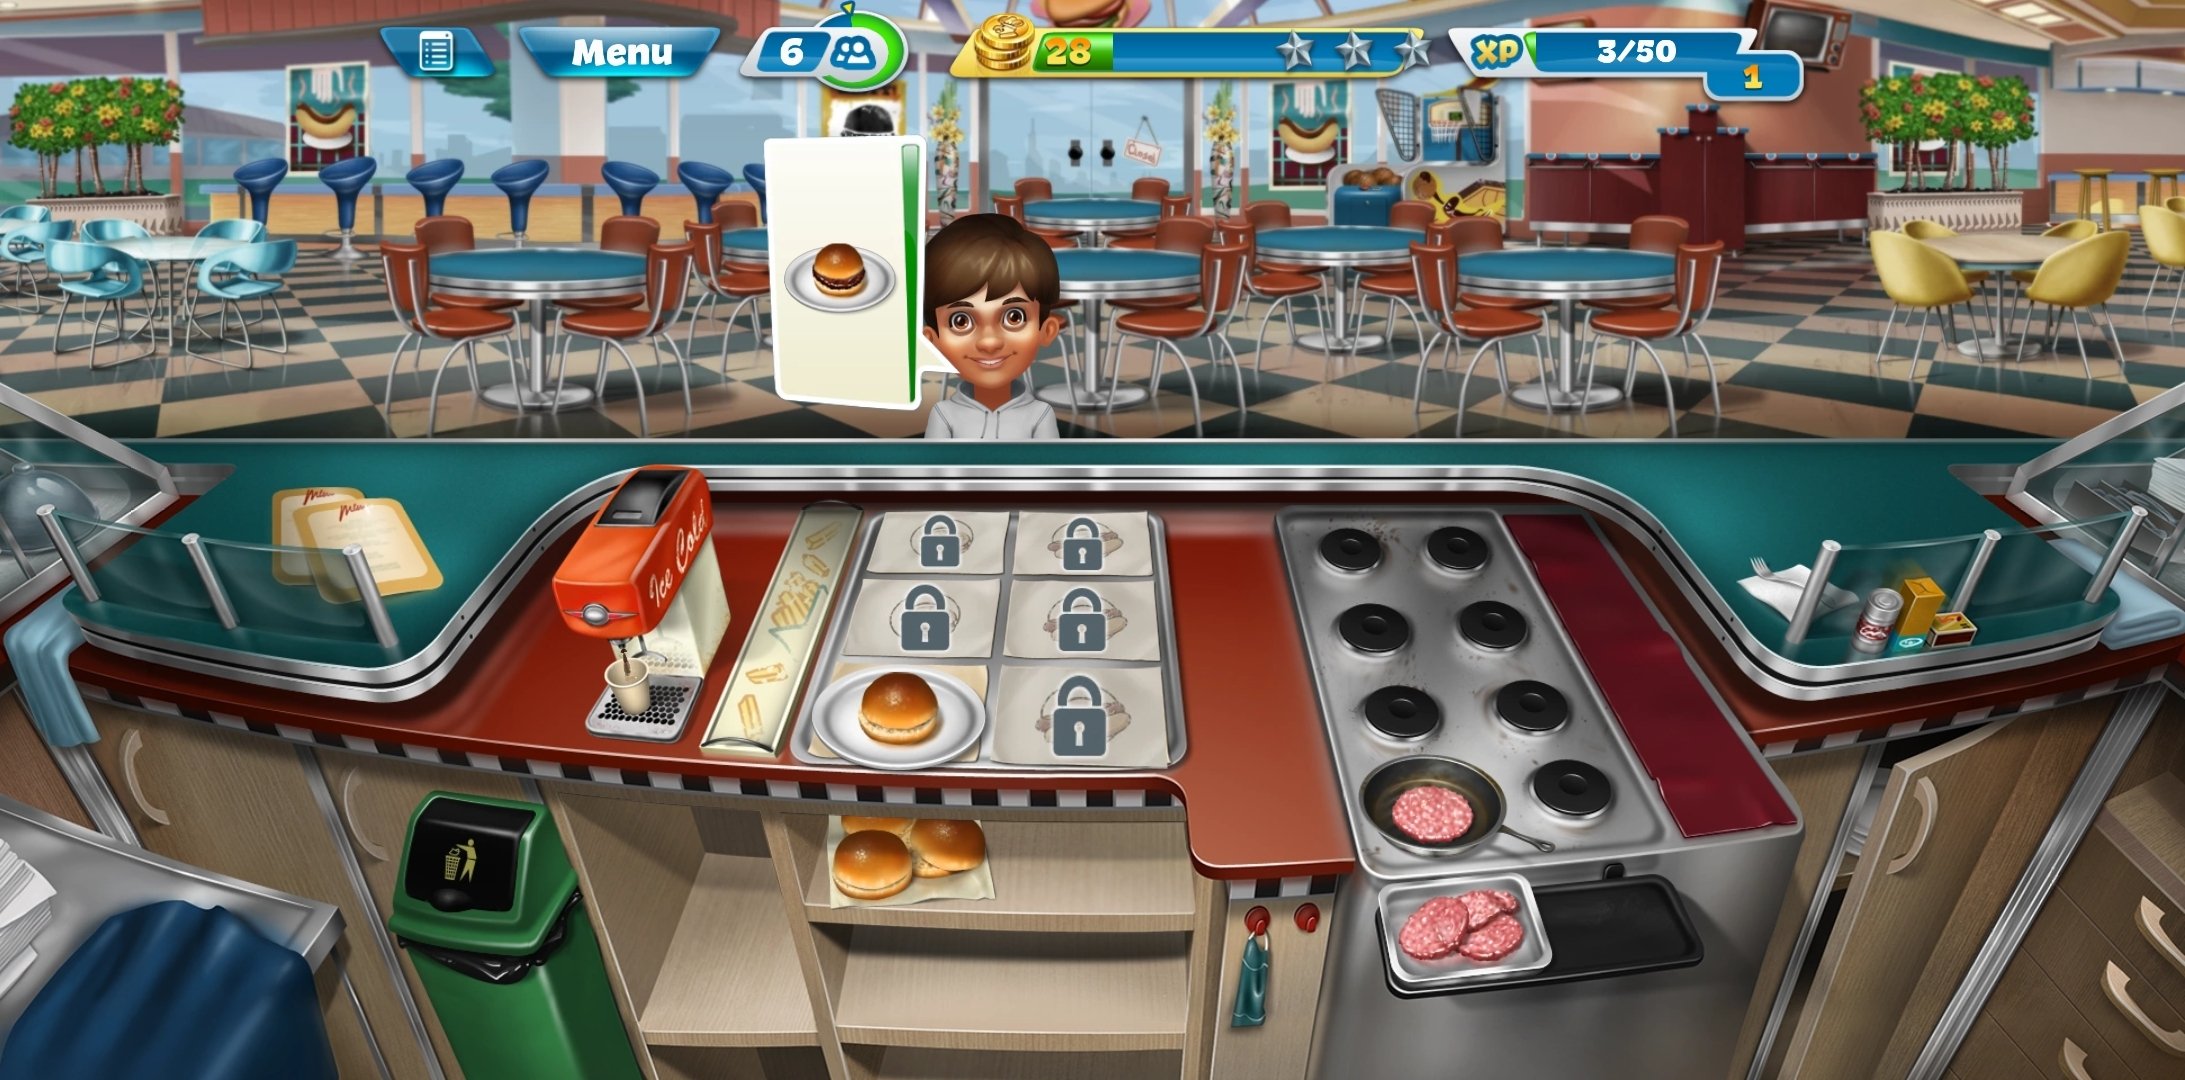 cooking fever free easy download in pc